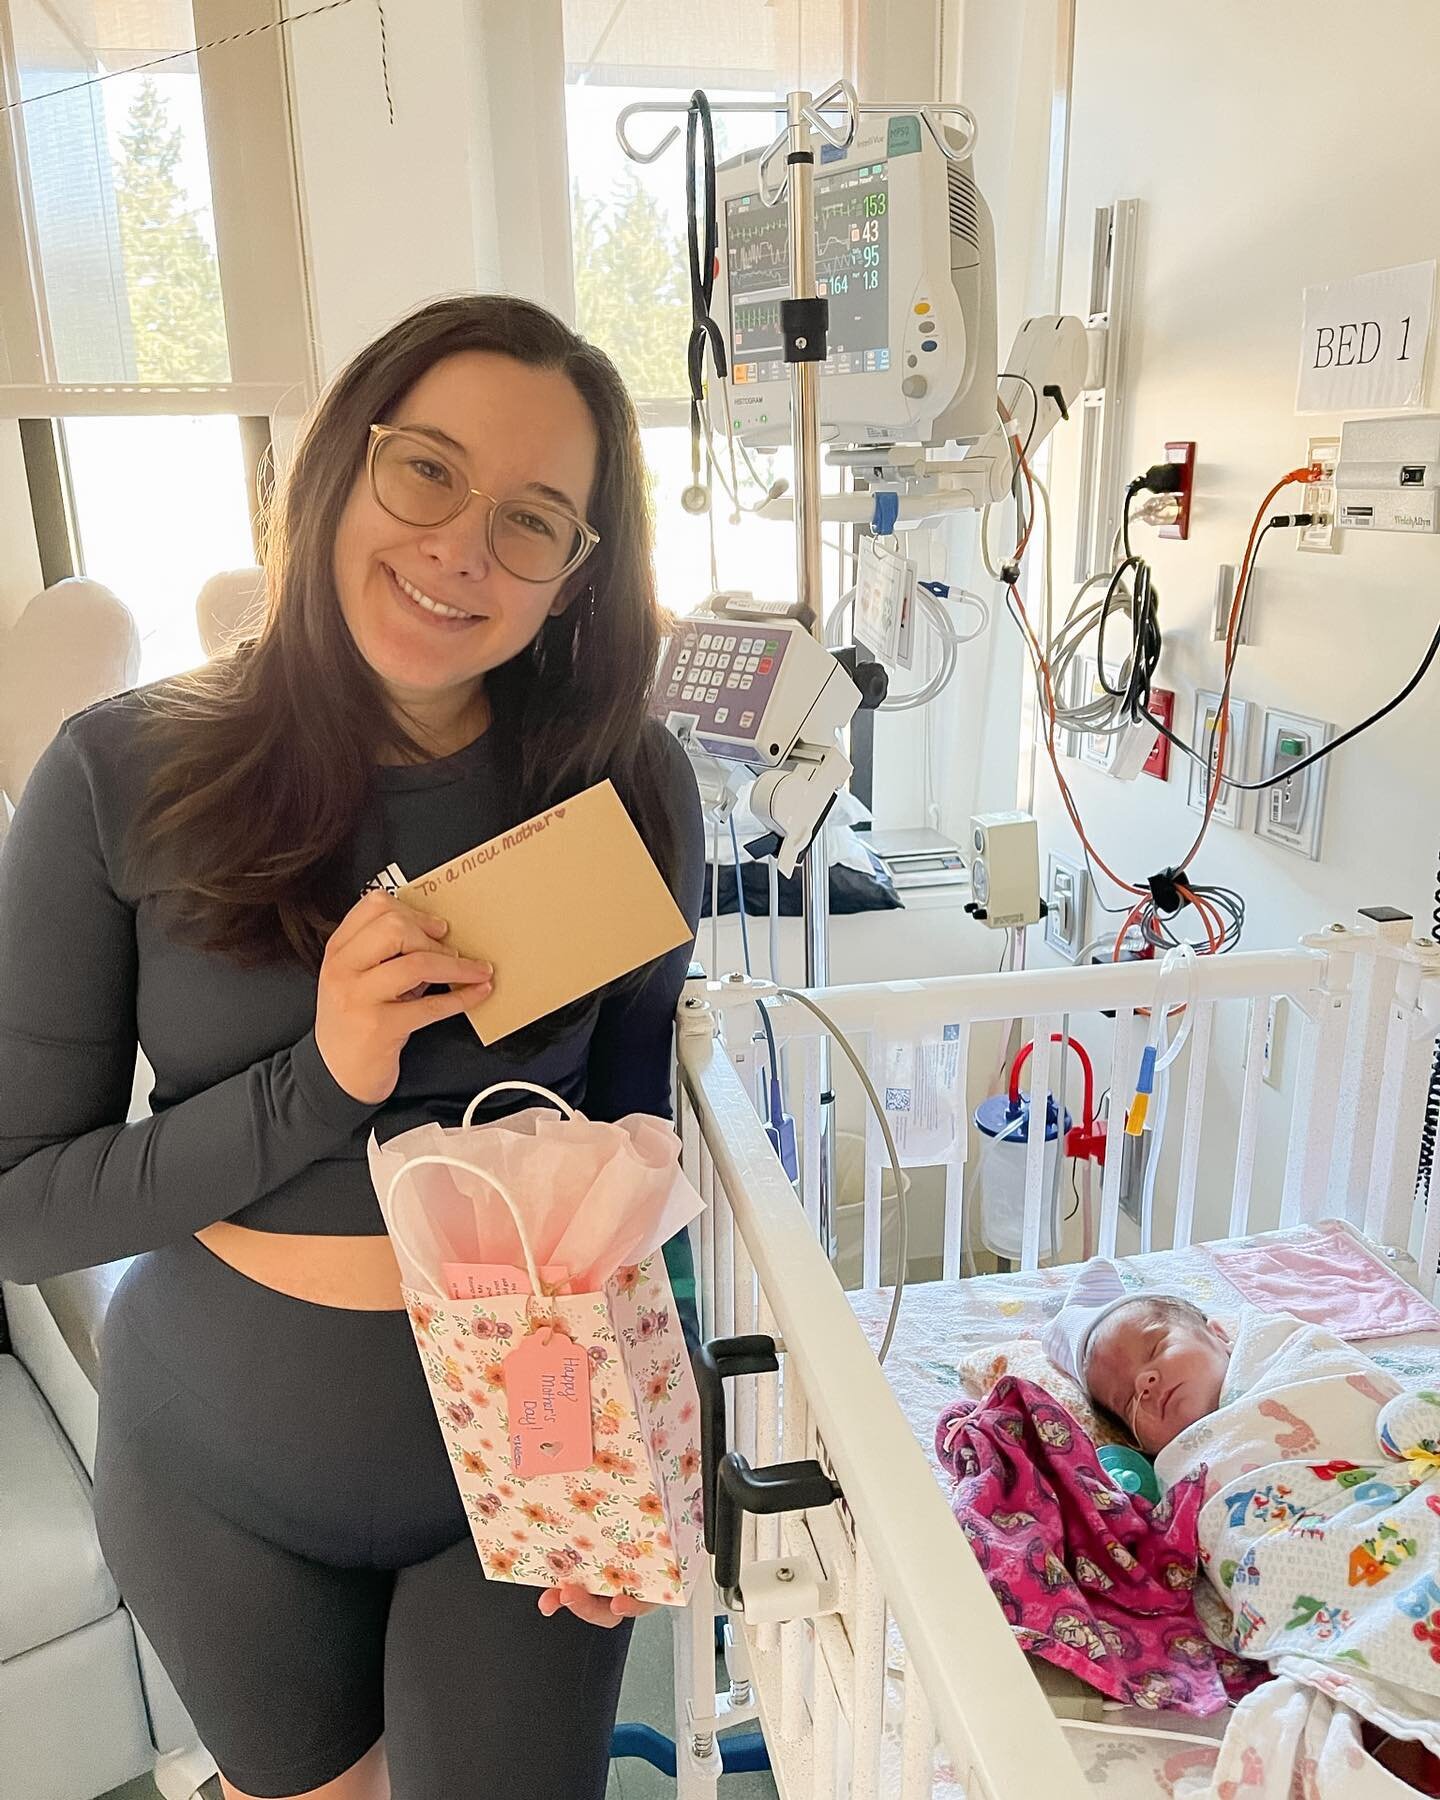 I didn&rsquo;t think we&rsquo;d spend our first Mother&rsquo;s Day together in the NICU, but anywhere miss Adeline is is where I want to be. I can&rsquo;t help but notice how much &ldquo;warrior&rdquo; is mentioned on these gifts from the NICU volunt